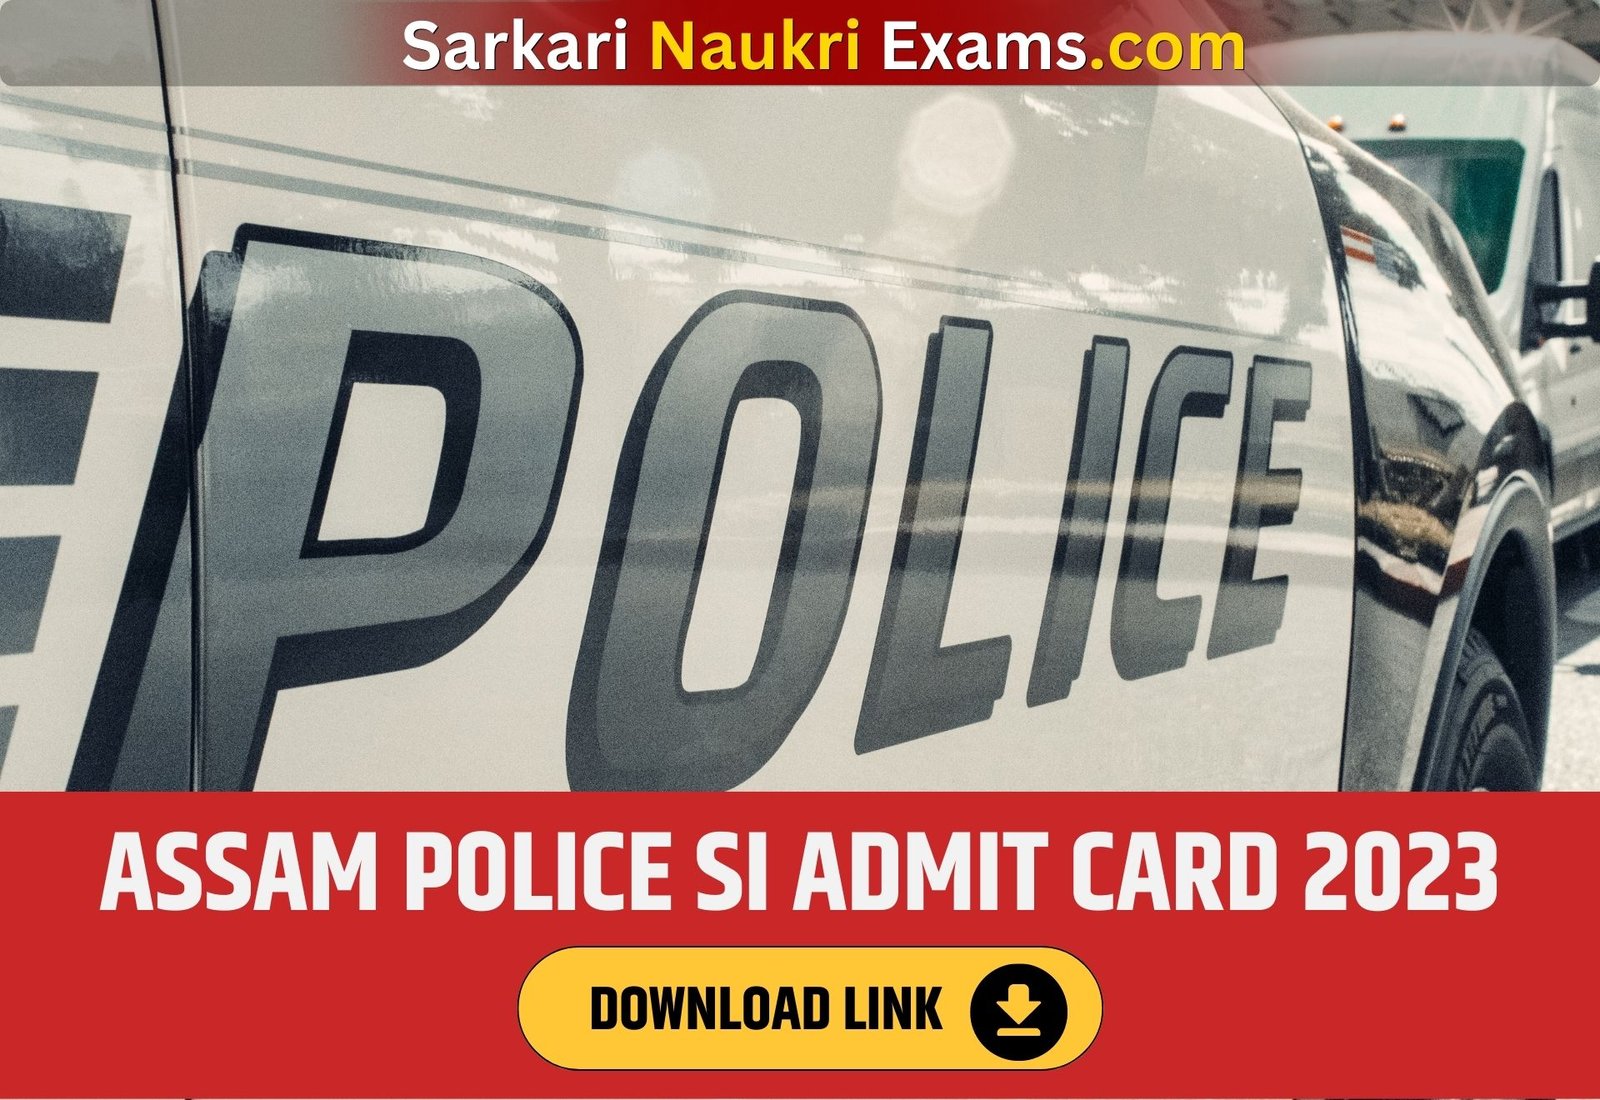 Assam Police SI Admit Card 2023 | Download Link, Exam Date